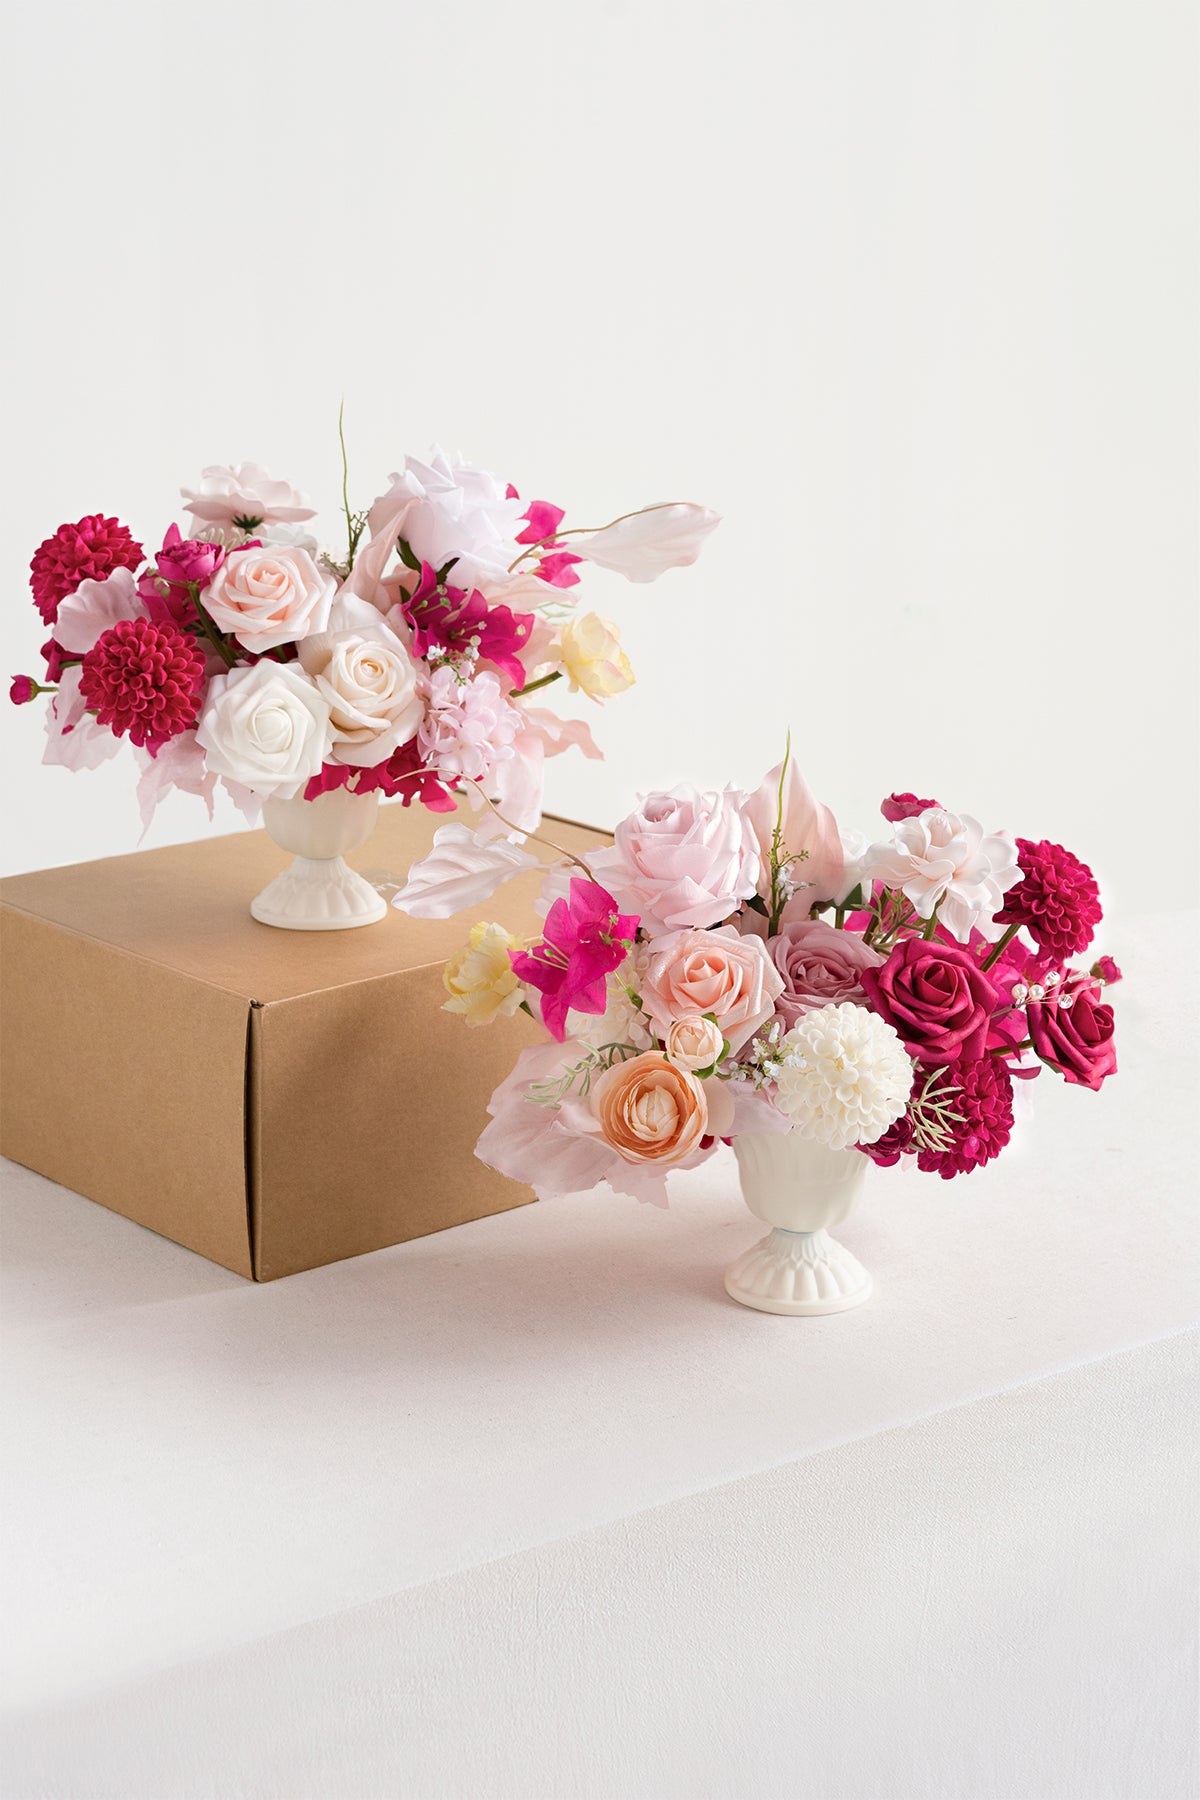 Large Floral Centerpiece Set in Passionate Pink & Blush | Clearance